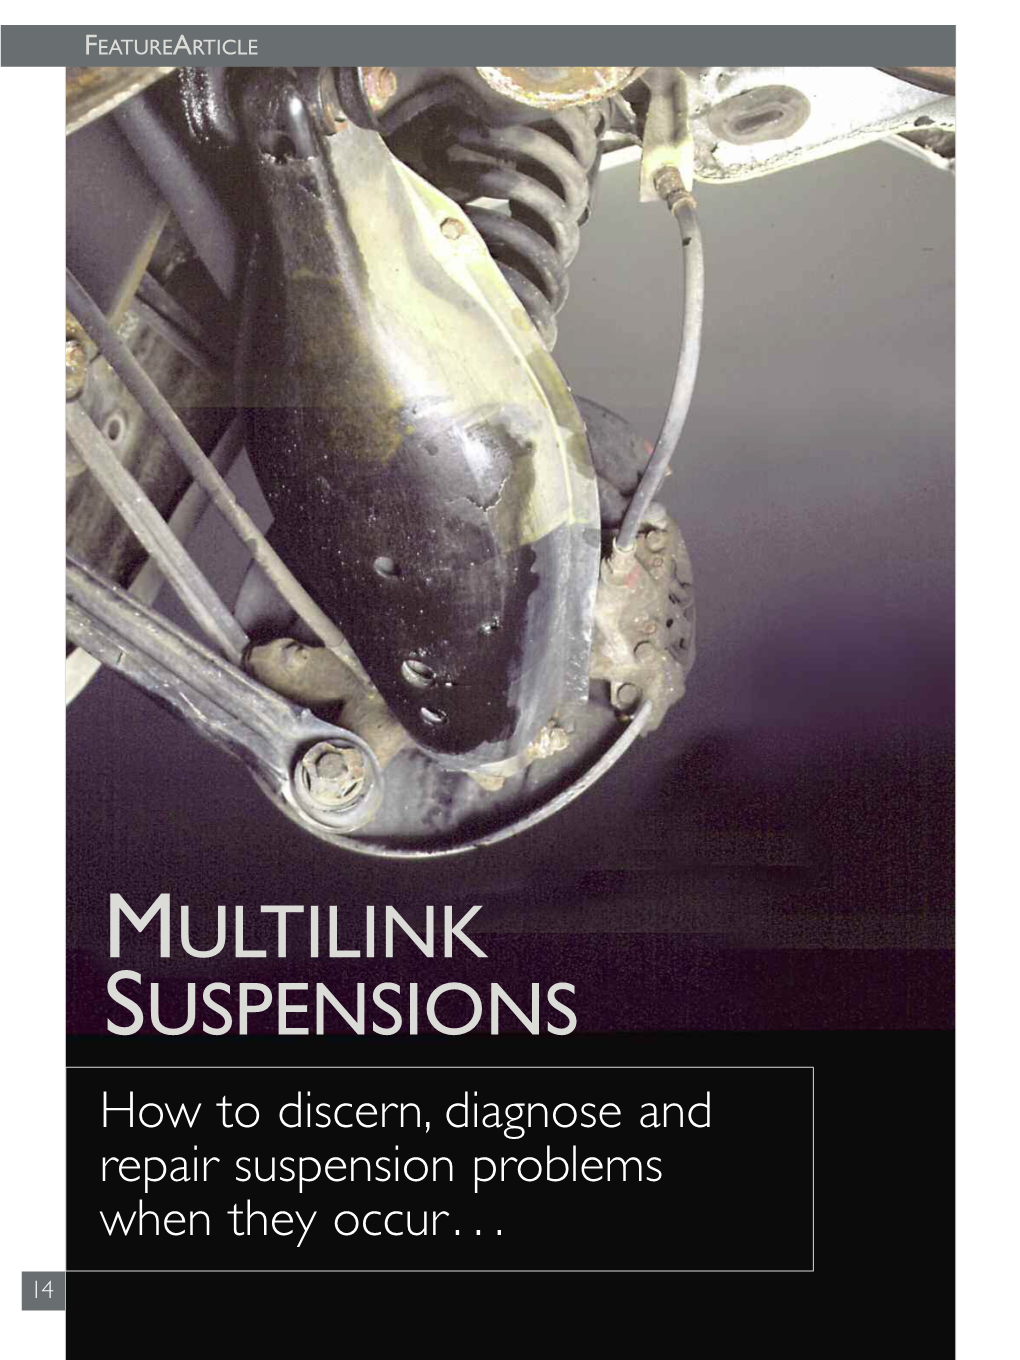 MULTILINK SUSPENSIONS How to Discern, Diagnose and Repair Suspension Problems When They Occur